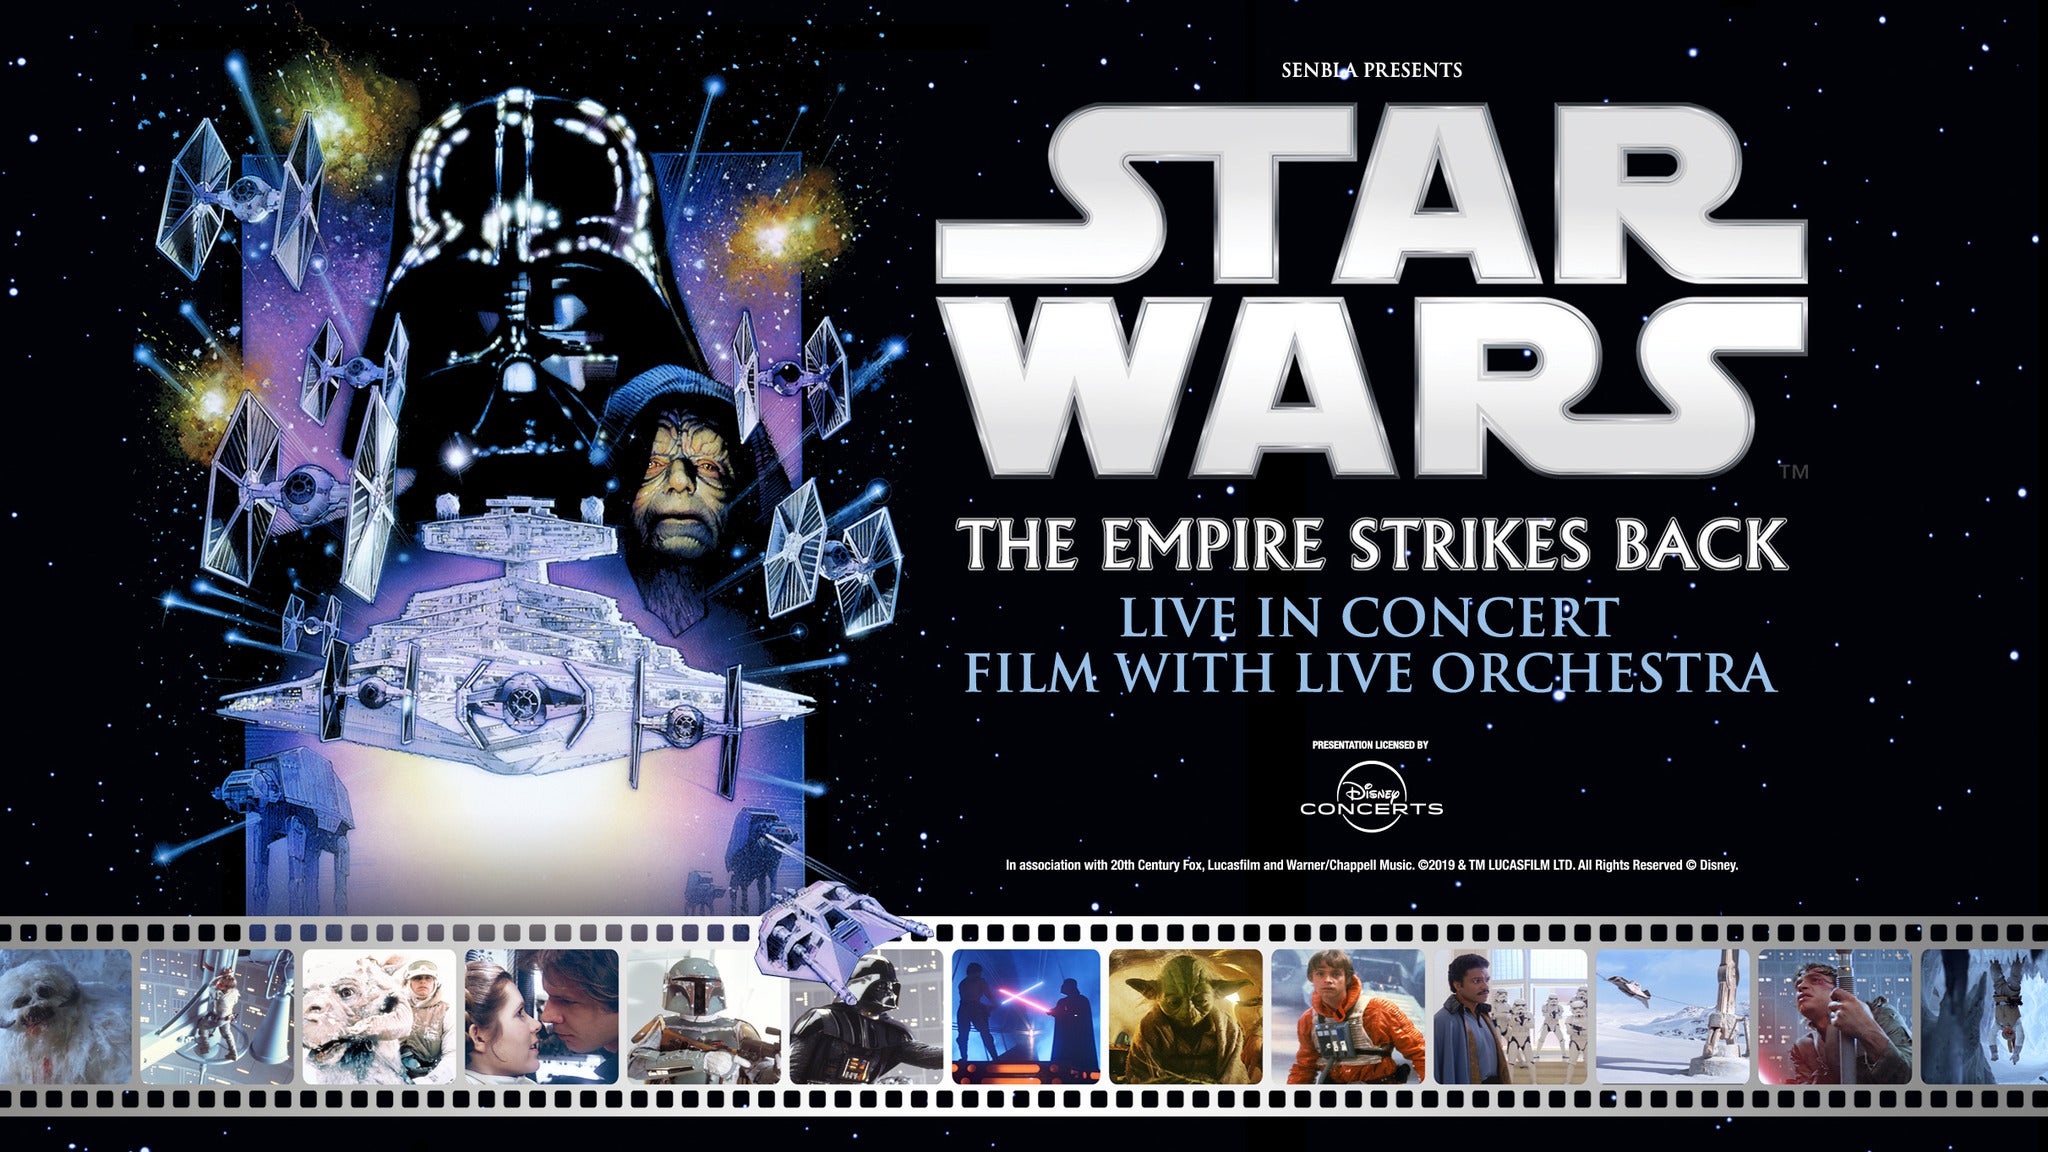 Star Wars: The Empire Strikes Back Film With Live Orchestra Event Title Pic